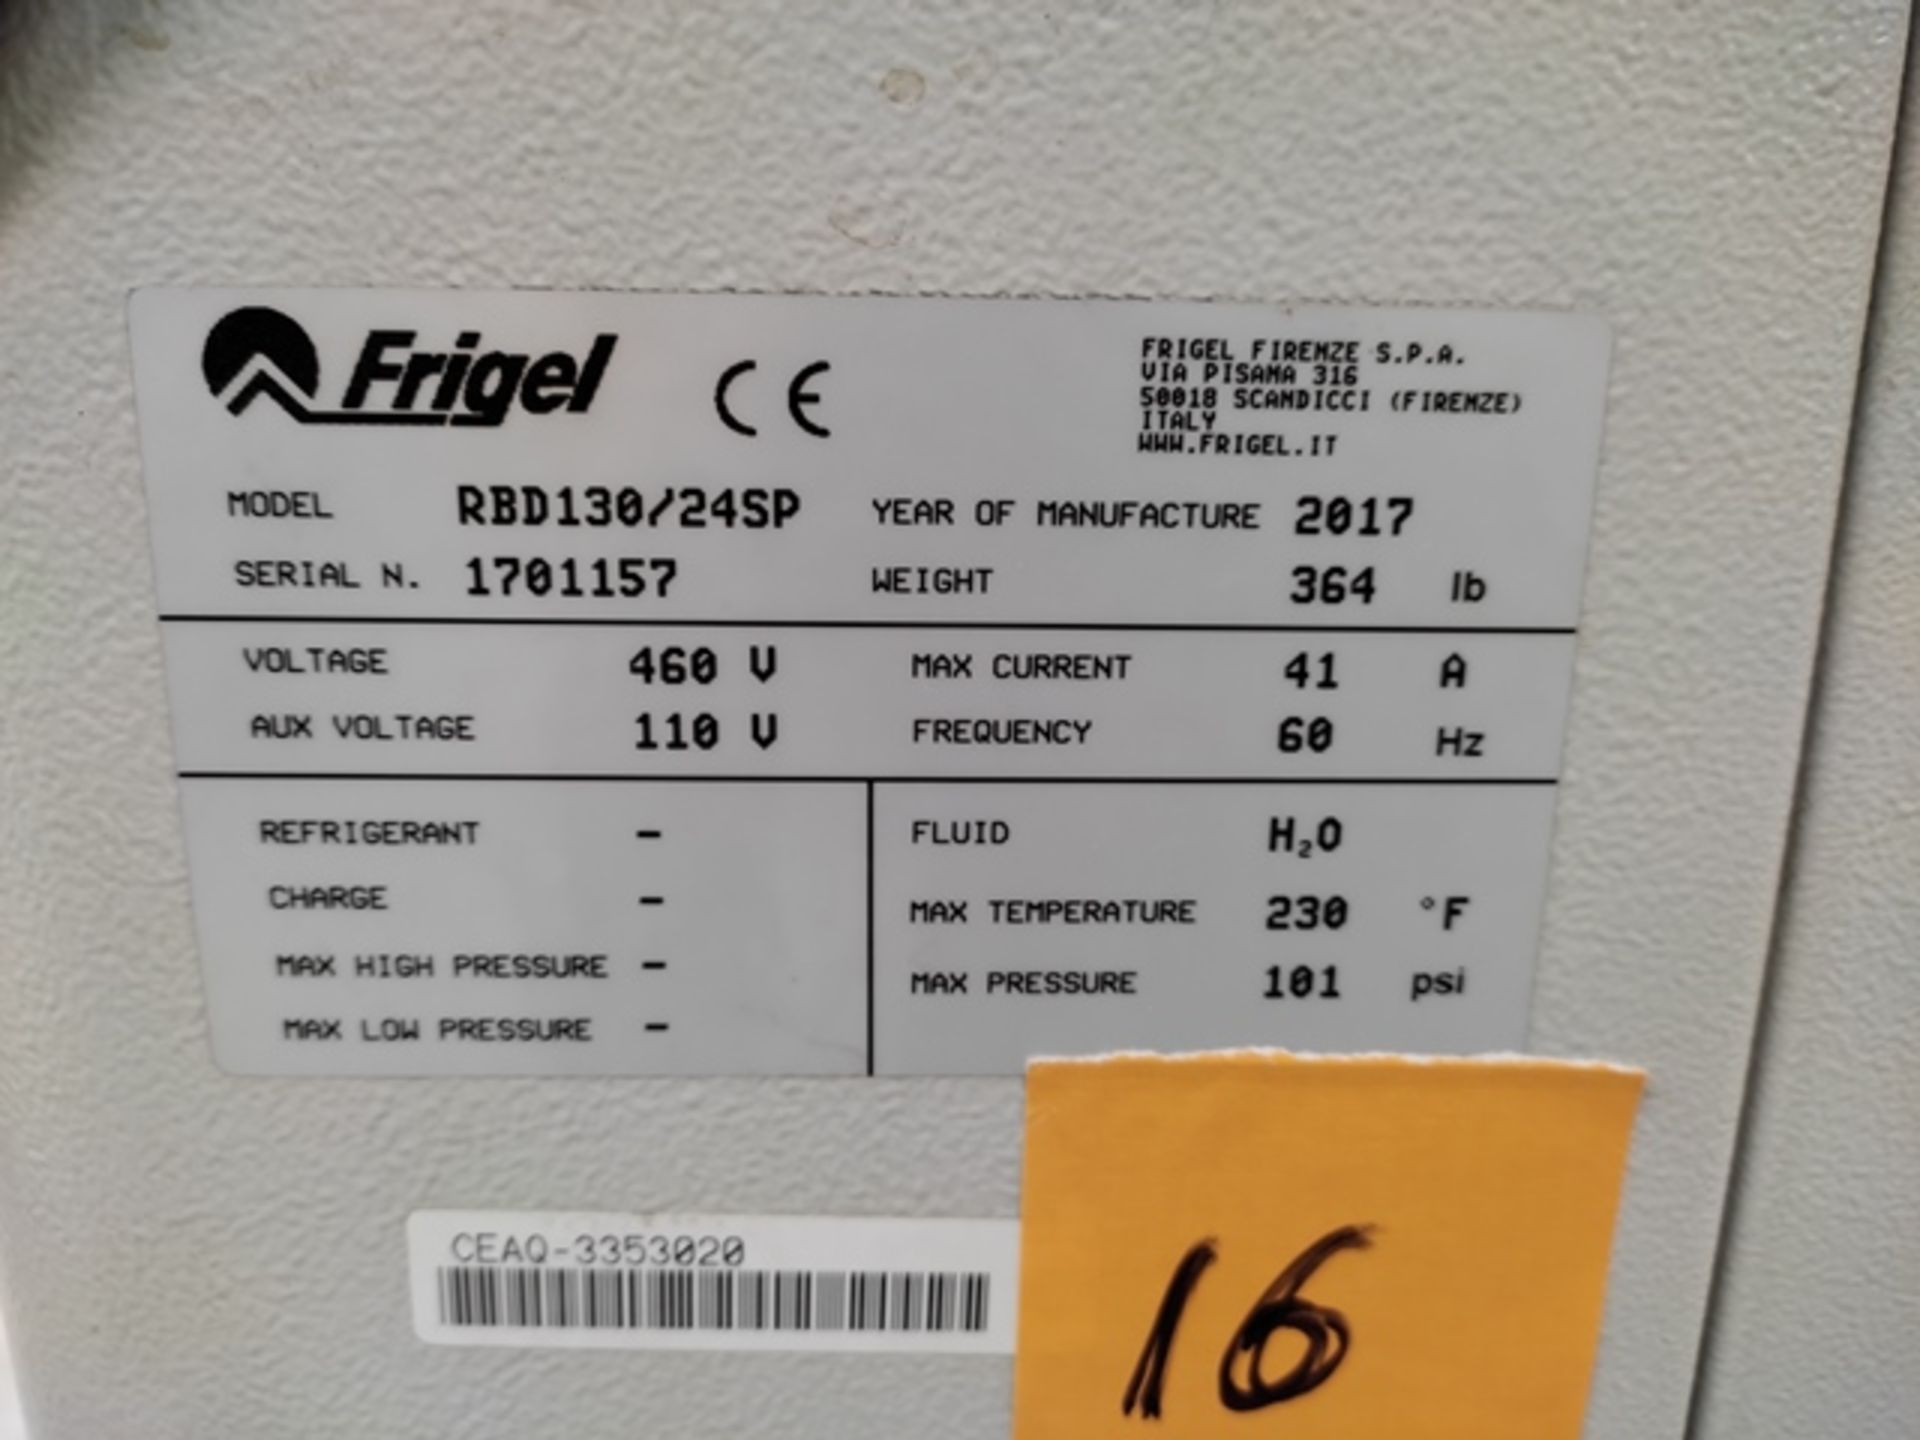 Lot of: (2) Frigel RBD130/24 SP 24 KW Flow Booster Temperature Controller, Mfg. Year: 2017 - Image 9 of 10